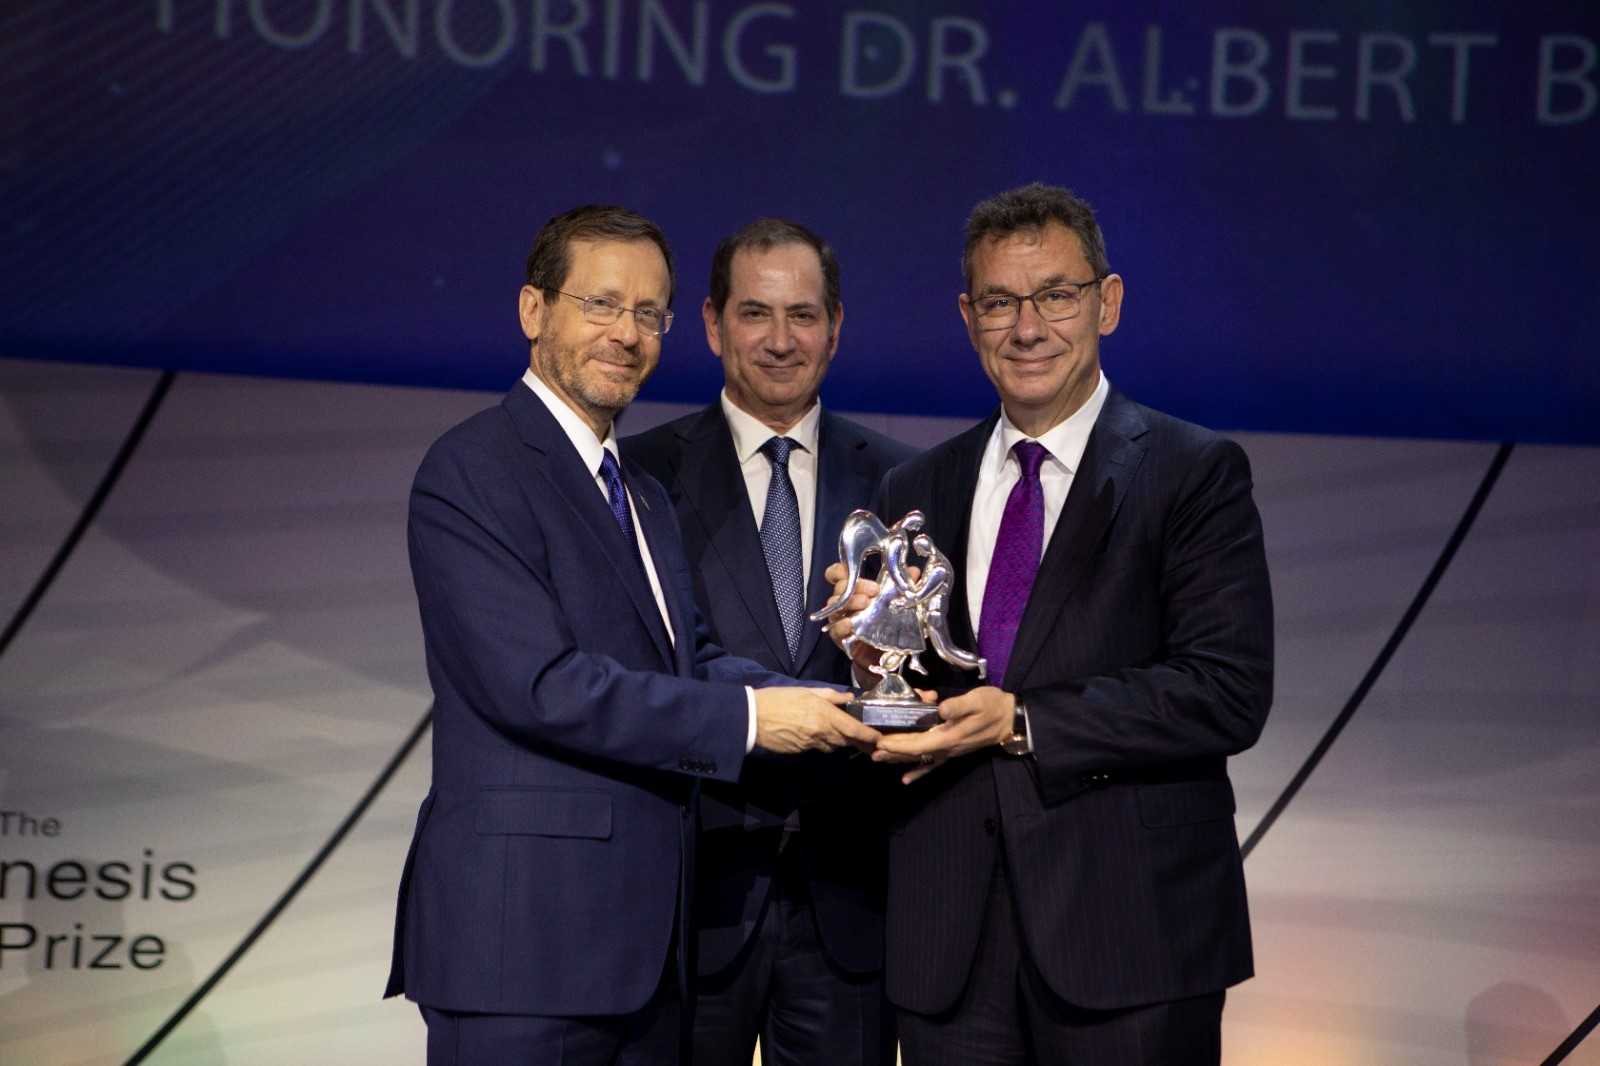 Pictured (L to R): President of Israel Isaac Herzog, Co-Founder and Chairman of The Genesis Prize Foundation Stan Polovets, 2022 Genesis Prize Laureate Dr. Albert Bourla. Photo Credit: Lior Mizrahi, Getty